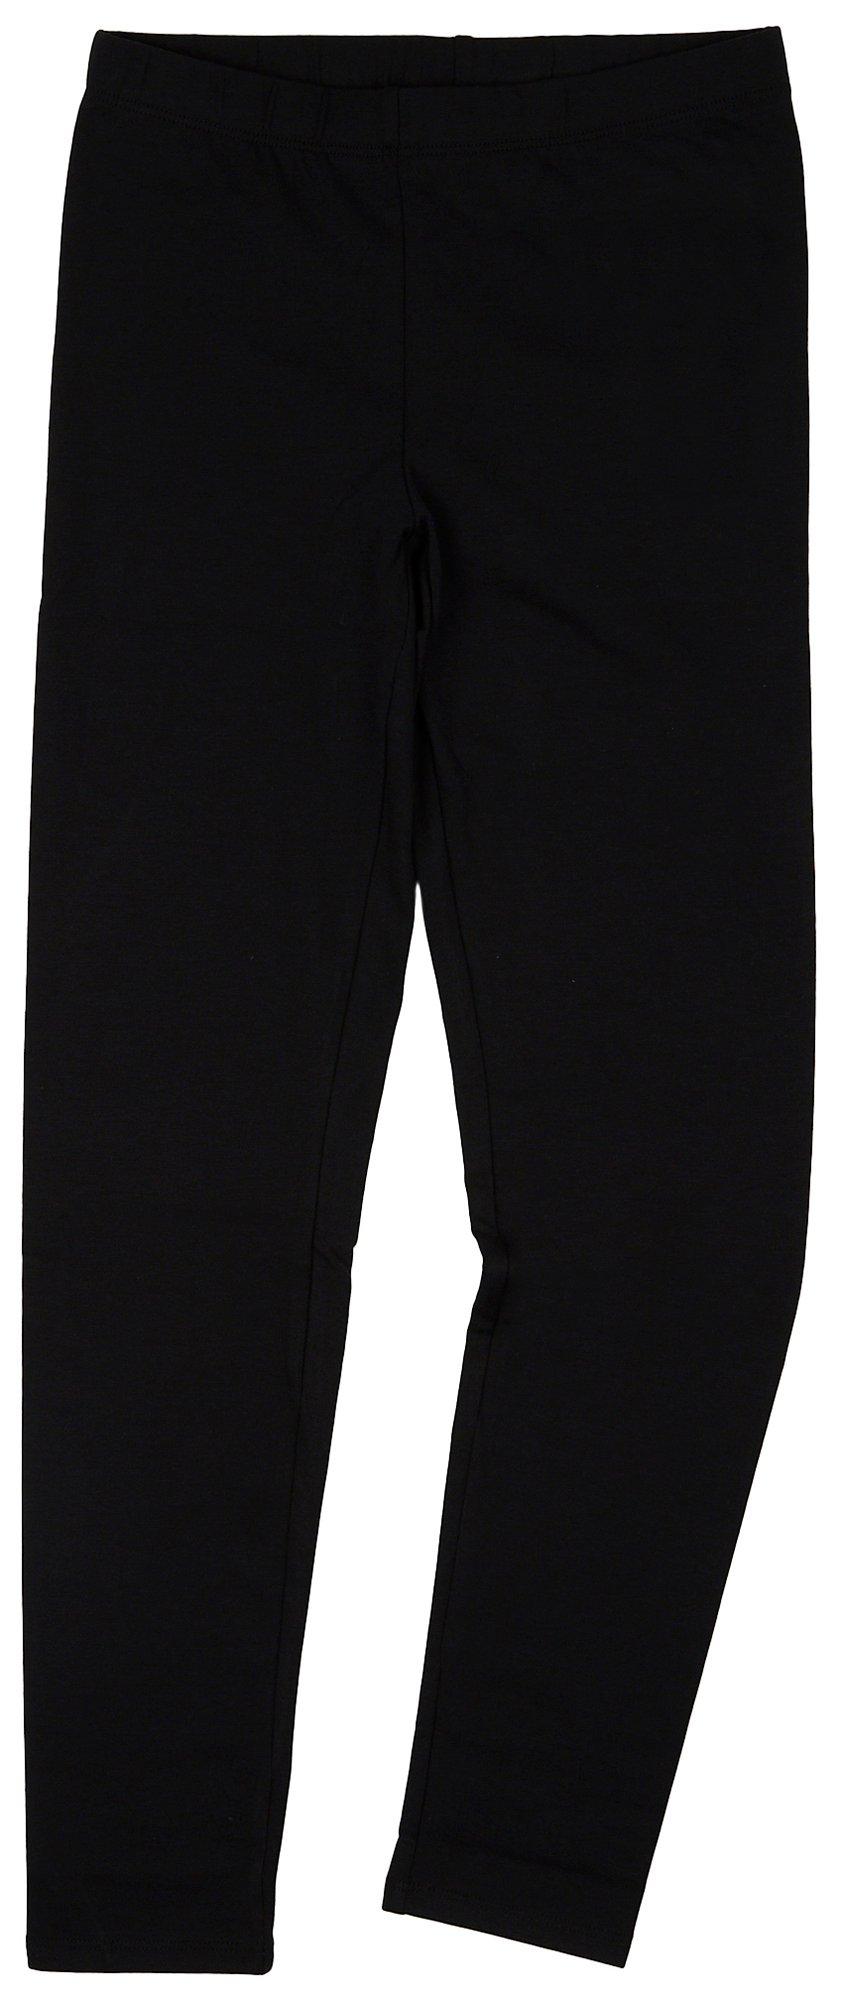 Fila Men's Athletic Pants Size Small with Zip-Up Pockets, Comfy Pants, Draw String Elastic Waist, 95% Polyester 5% Spandex